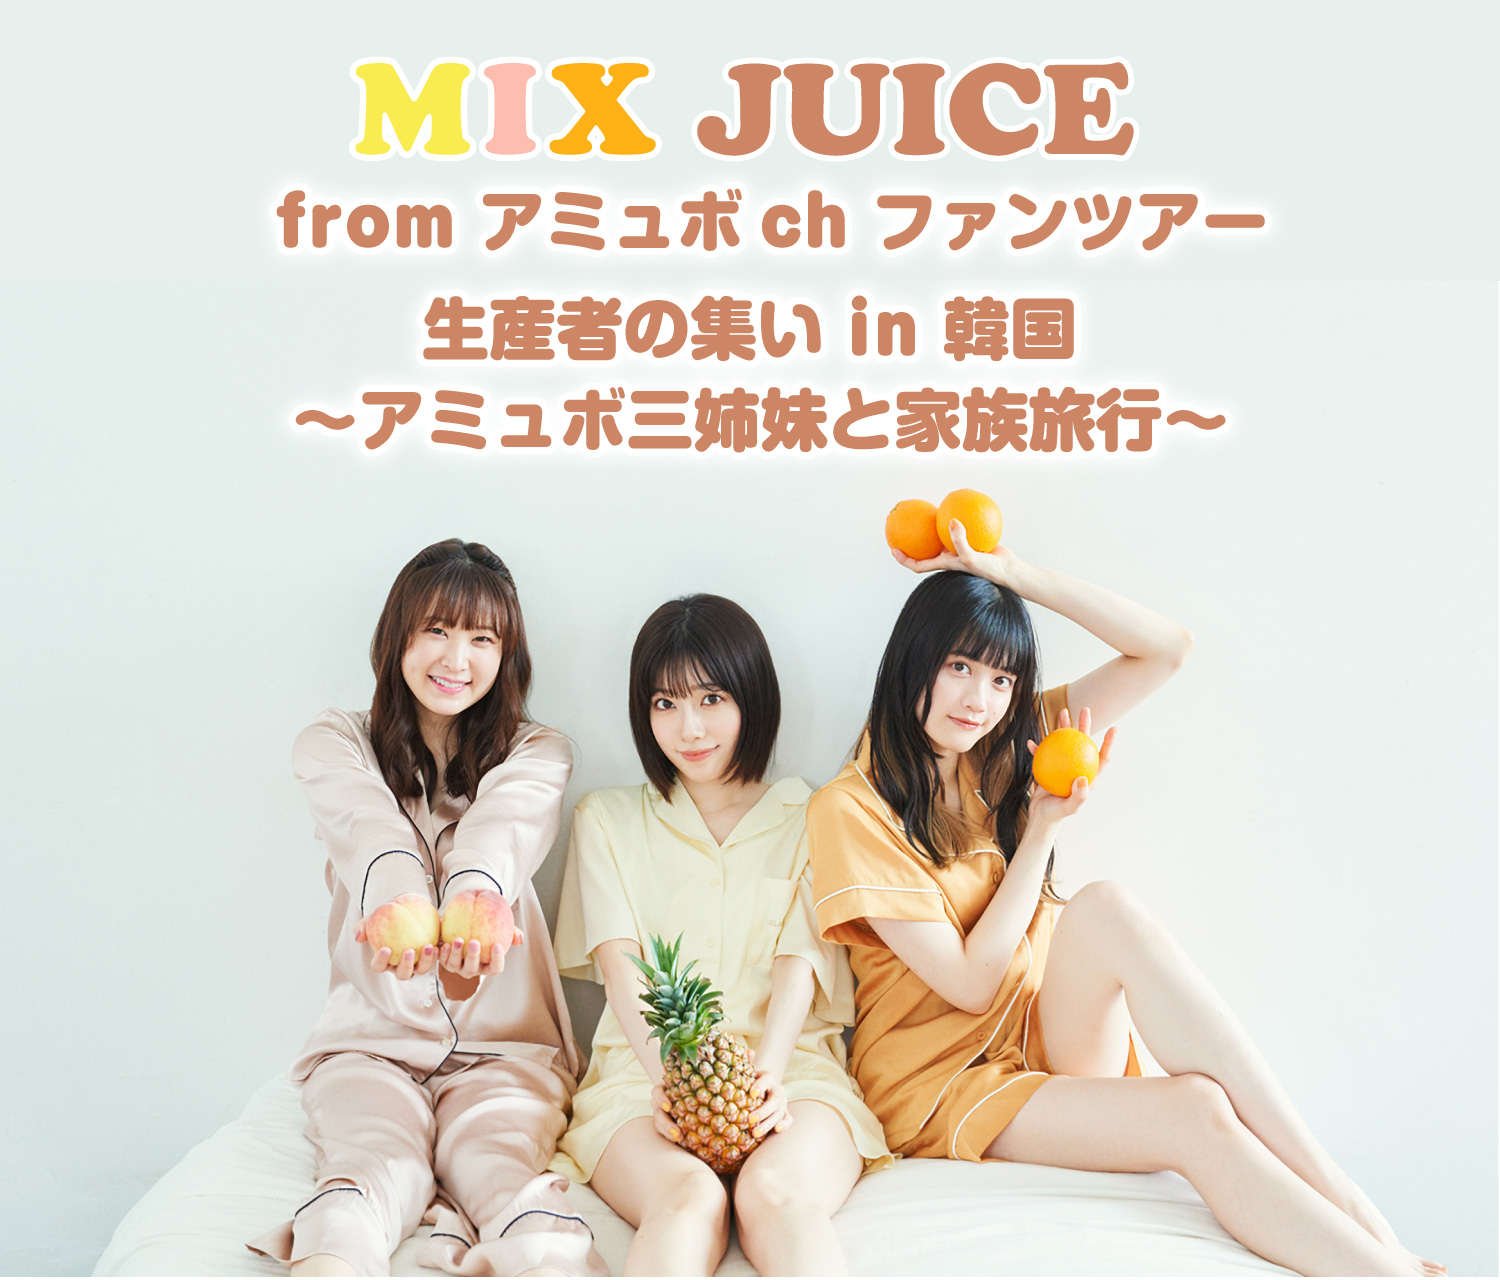 MIX JUICE from アミュボch ファンツアー 生産者の集い in 韓国 ～アミュボ三姉妹